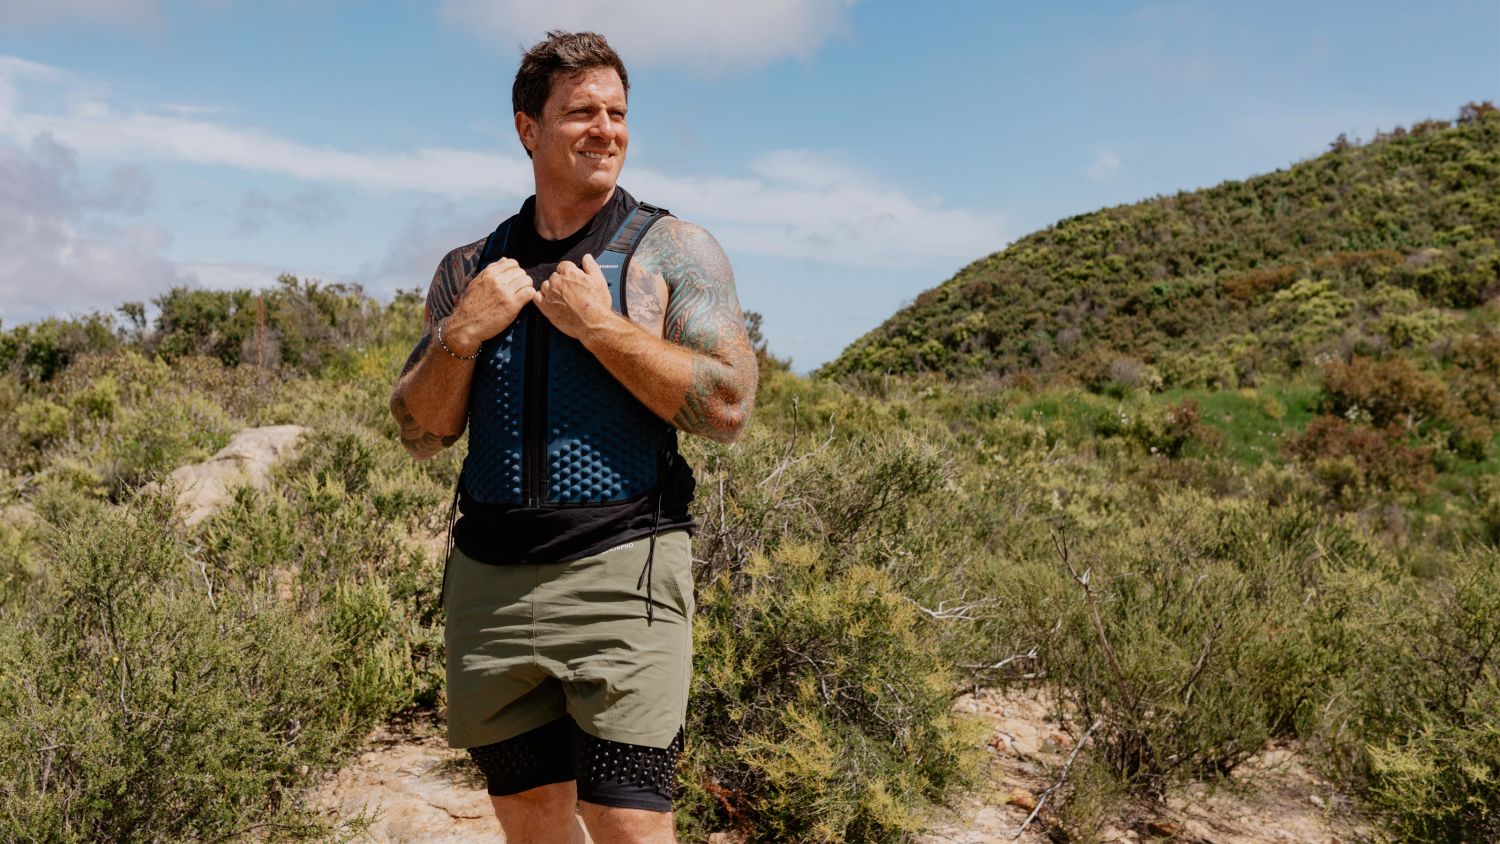 Chef Seamus Mullen walks outdoors in the OMORPHO G-Vest+ and weighted workout shorts